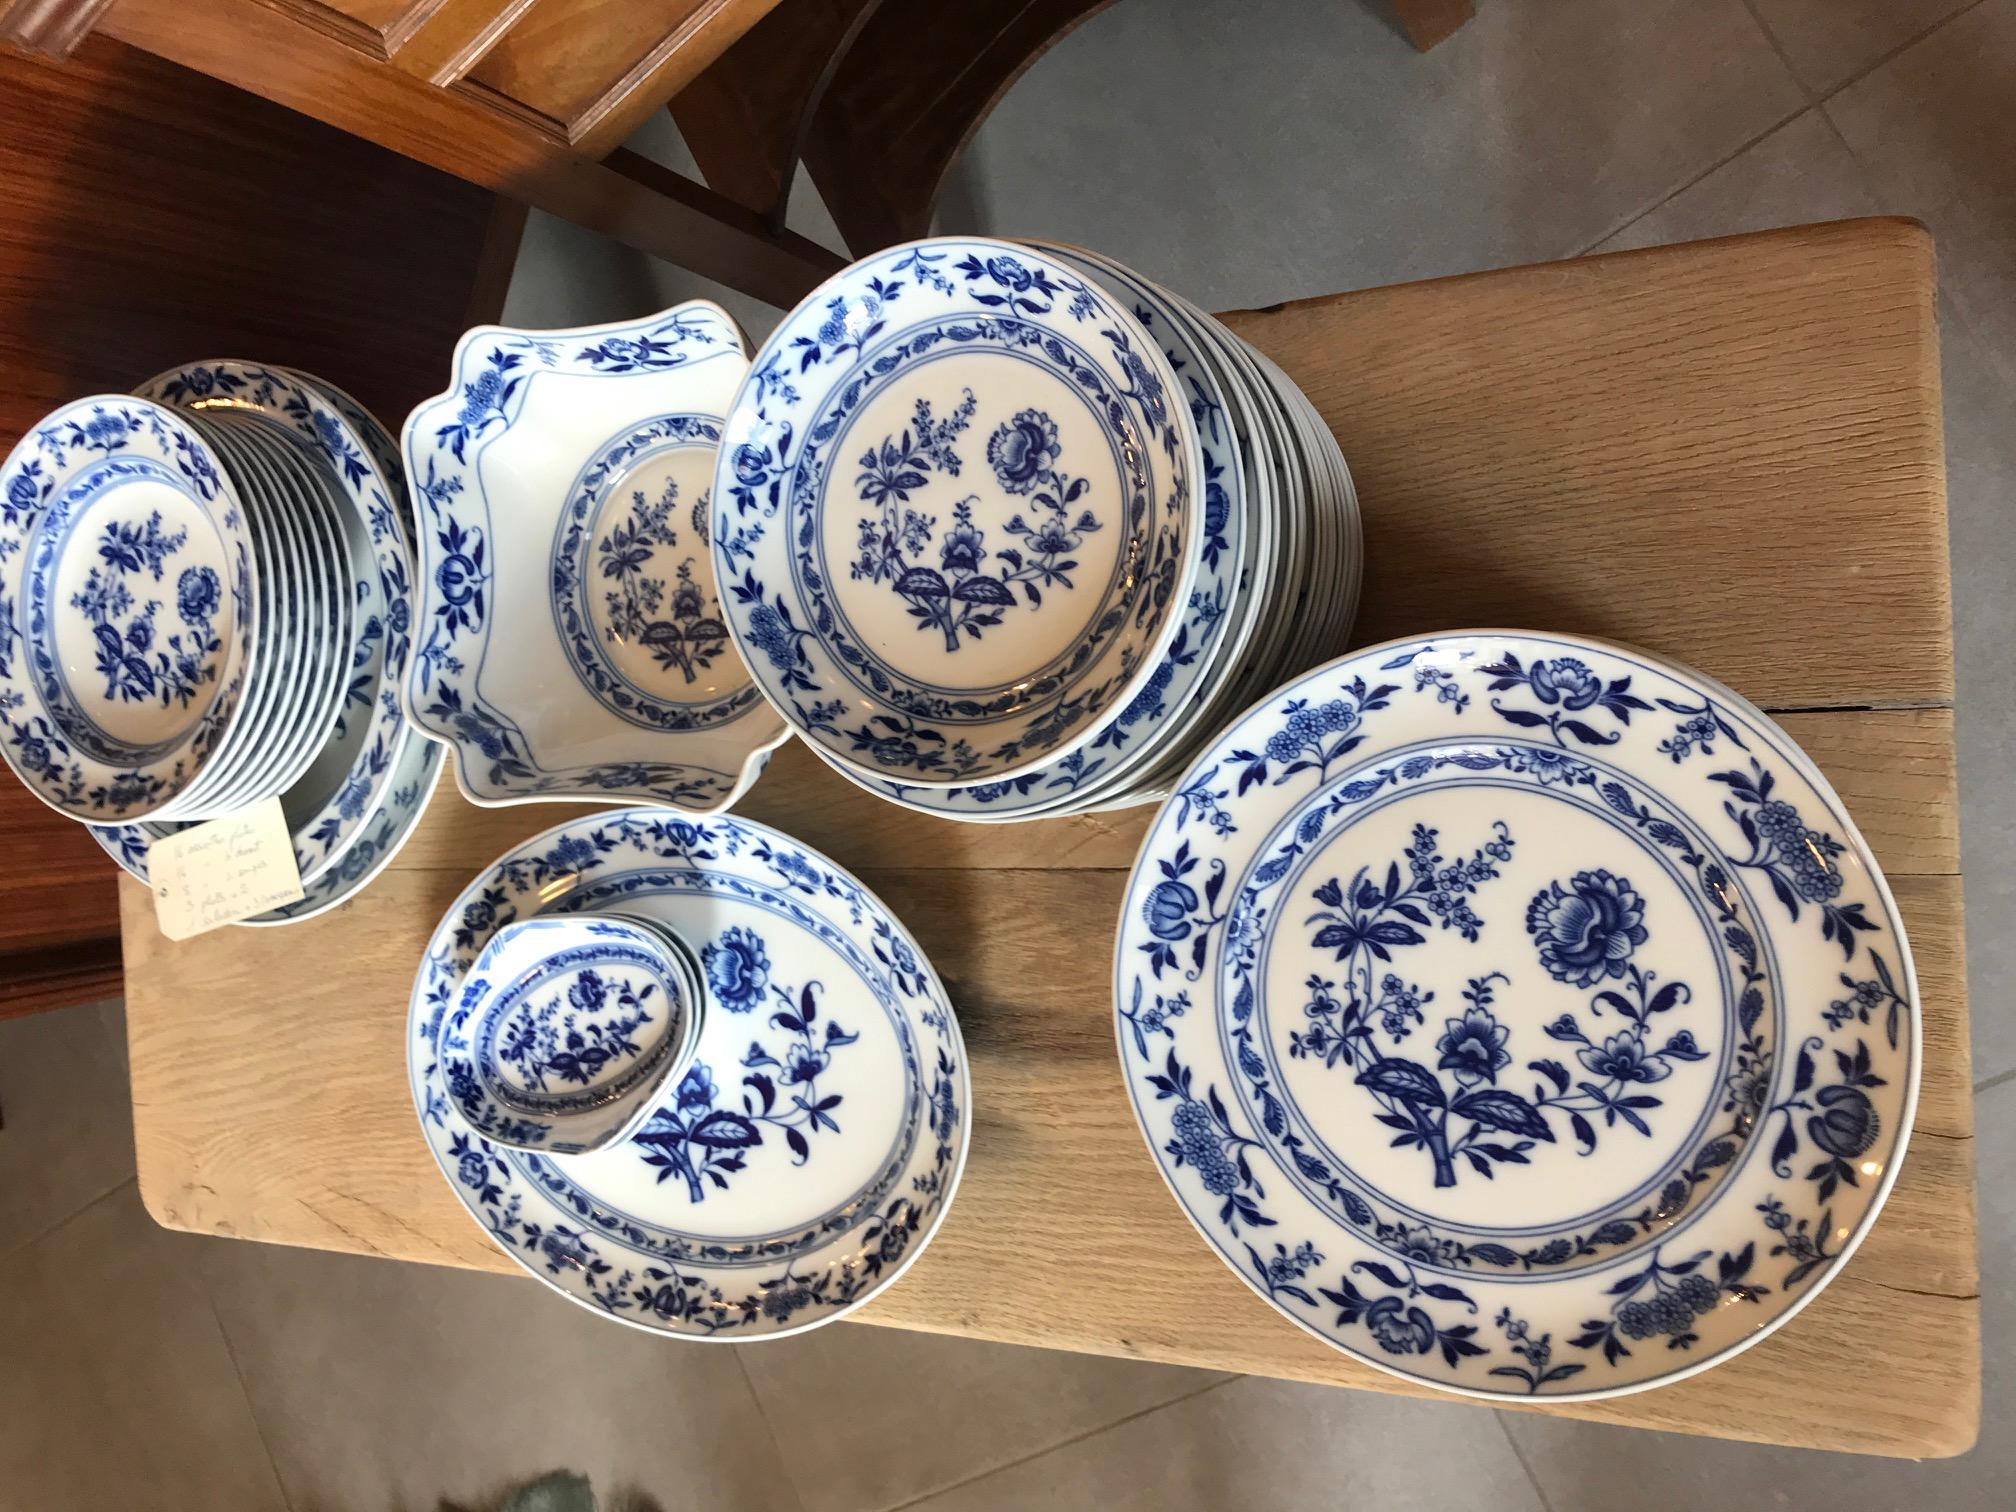 49 pieces service in very slightly bluish white porcelain and blue patterns, hand painted.
Elegant porcelain model. The blue patterns take up a great classic of the East India Company of the 18th century. This porcelain was at the time a true